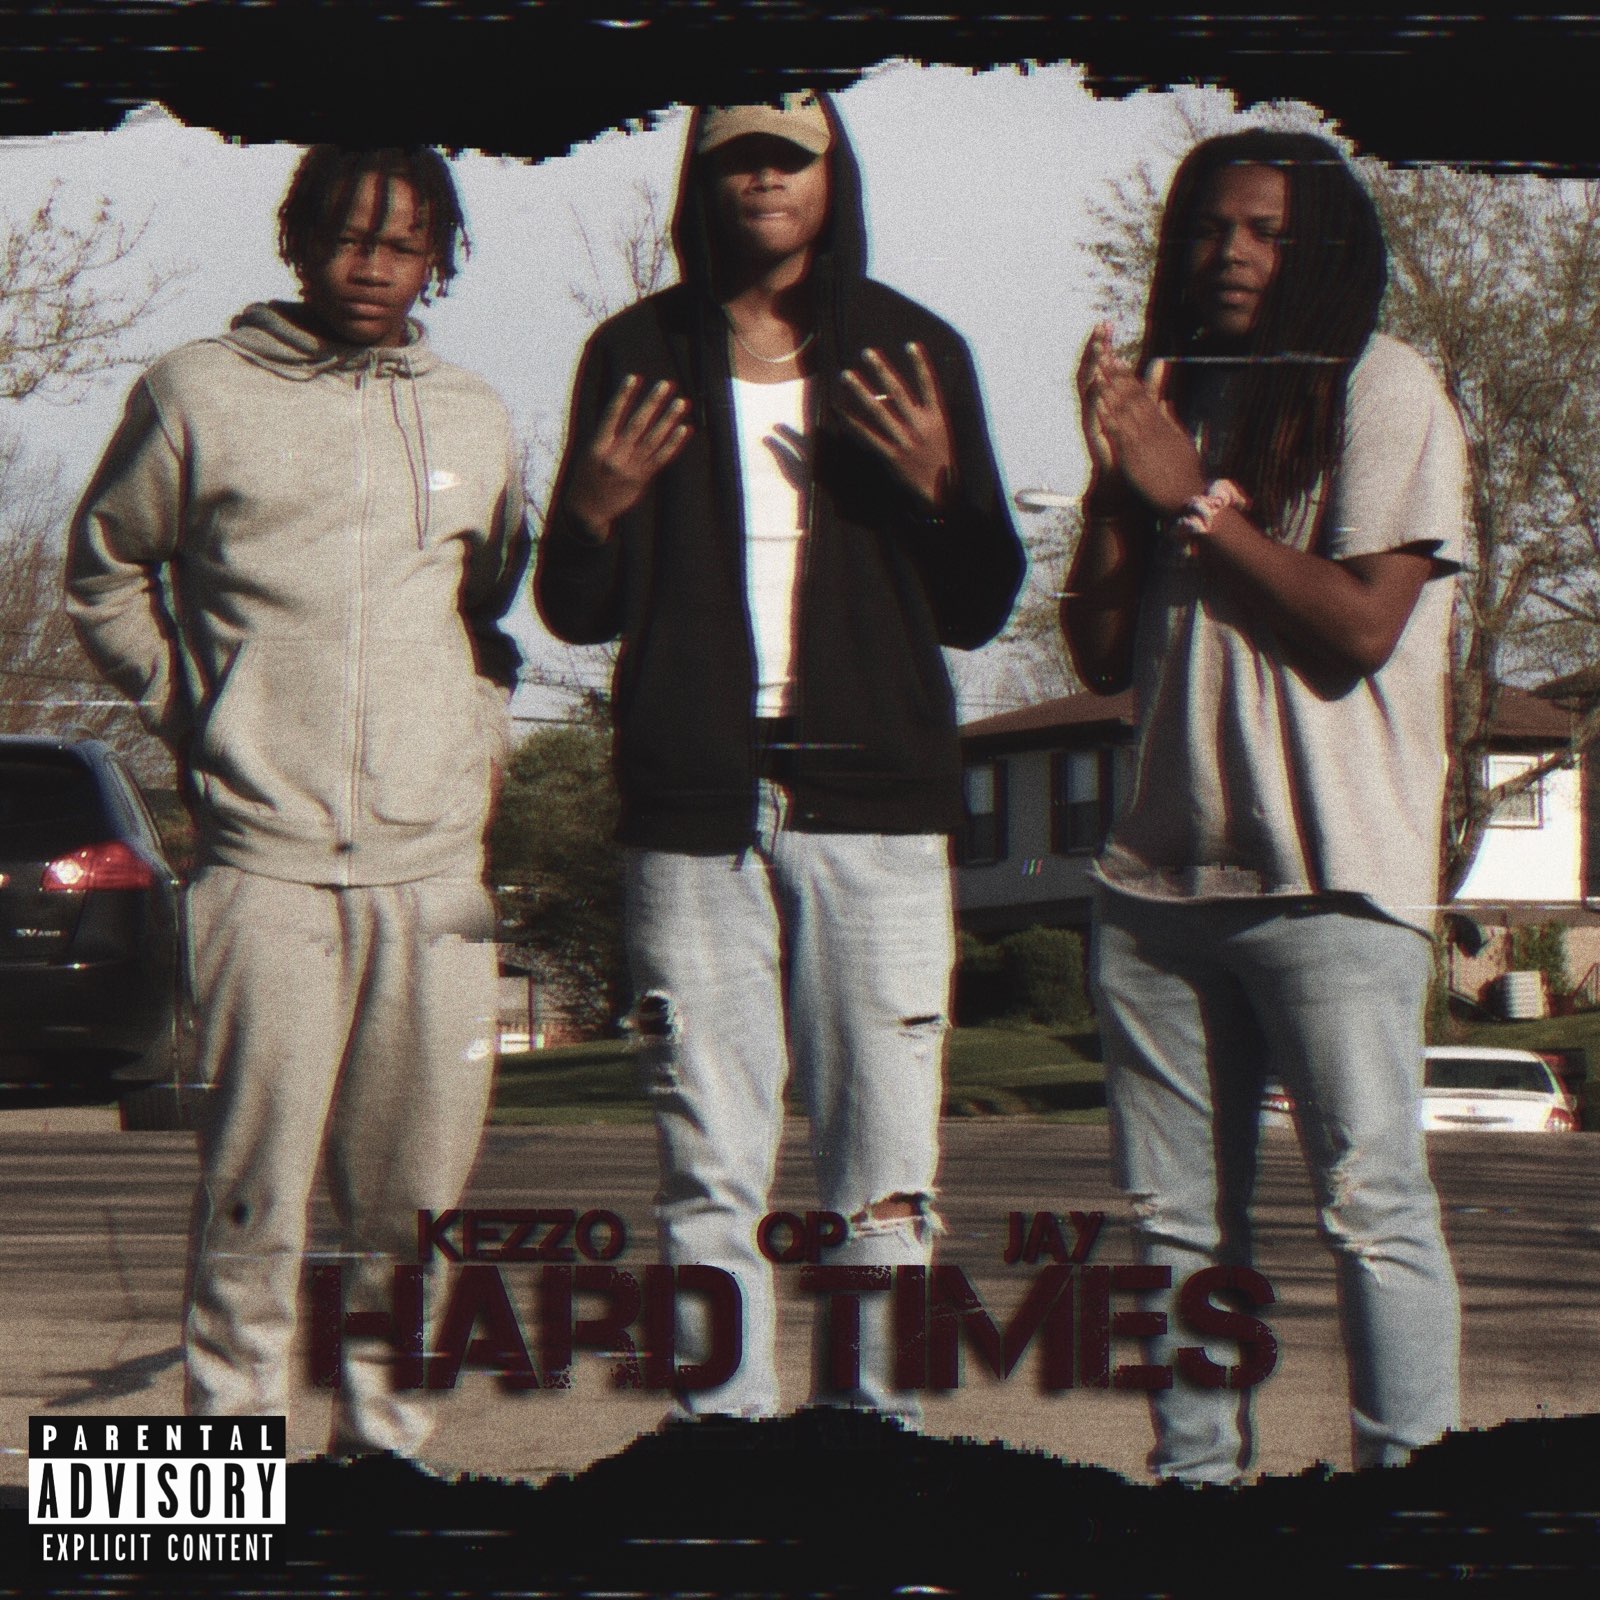 Art for HARD TIMES by Jay ft Kezzo & OP